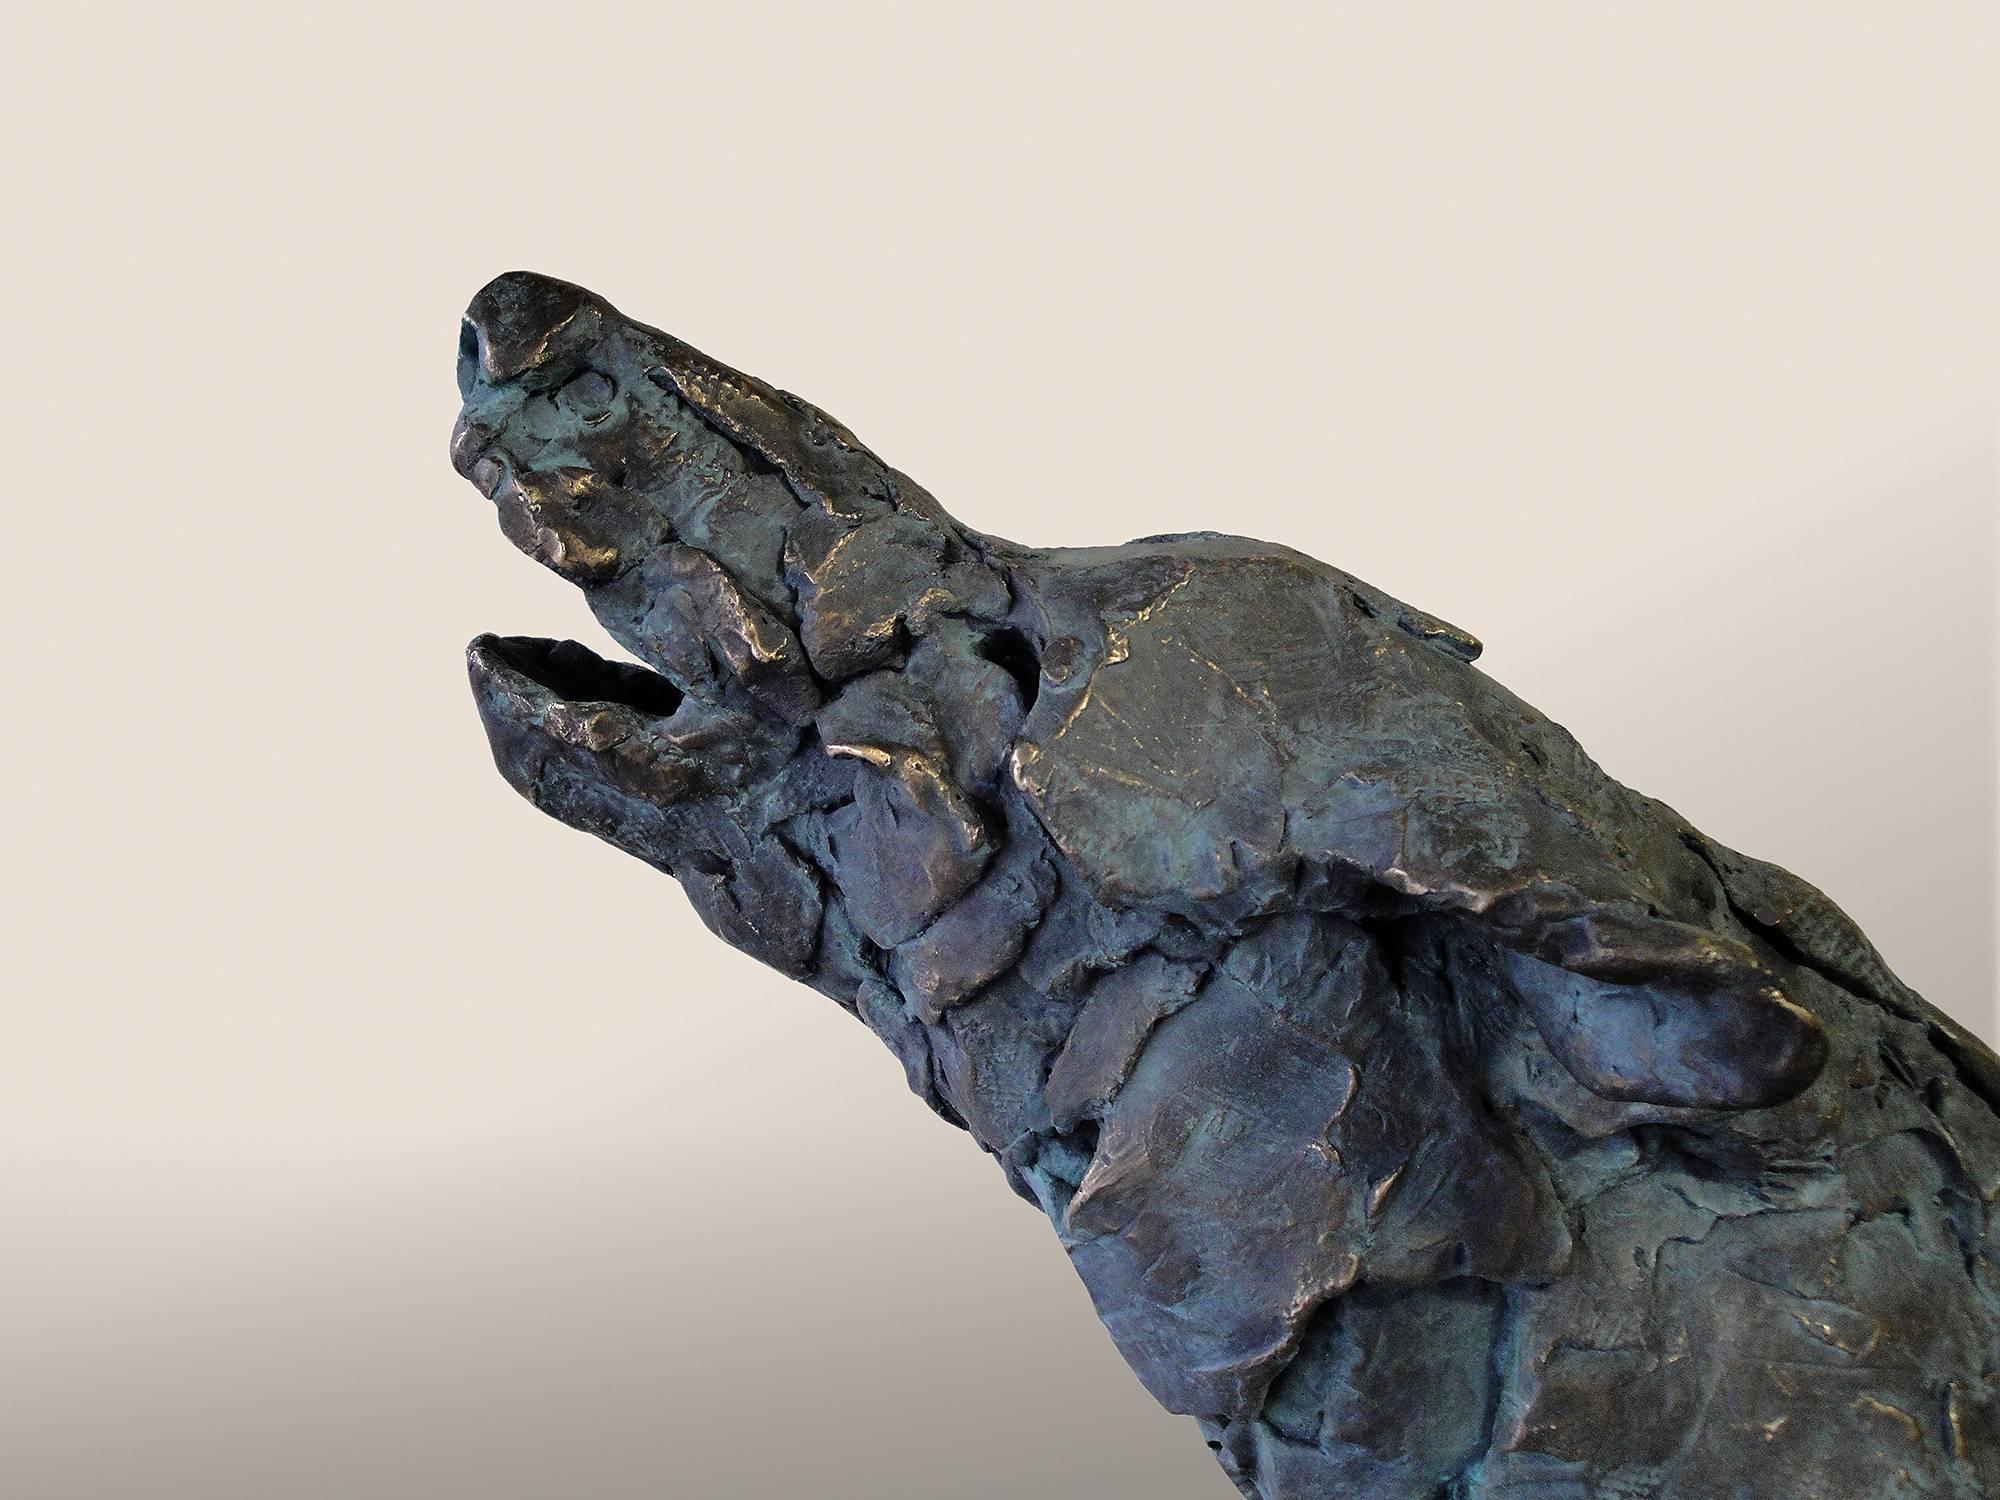 Howling Wolf 7/7 - Sculpture by Sharon Loper